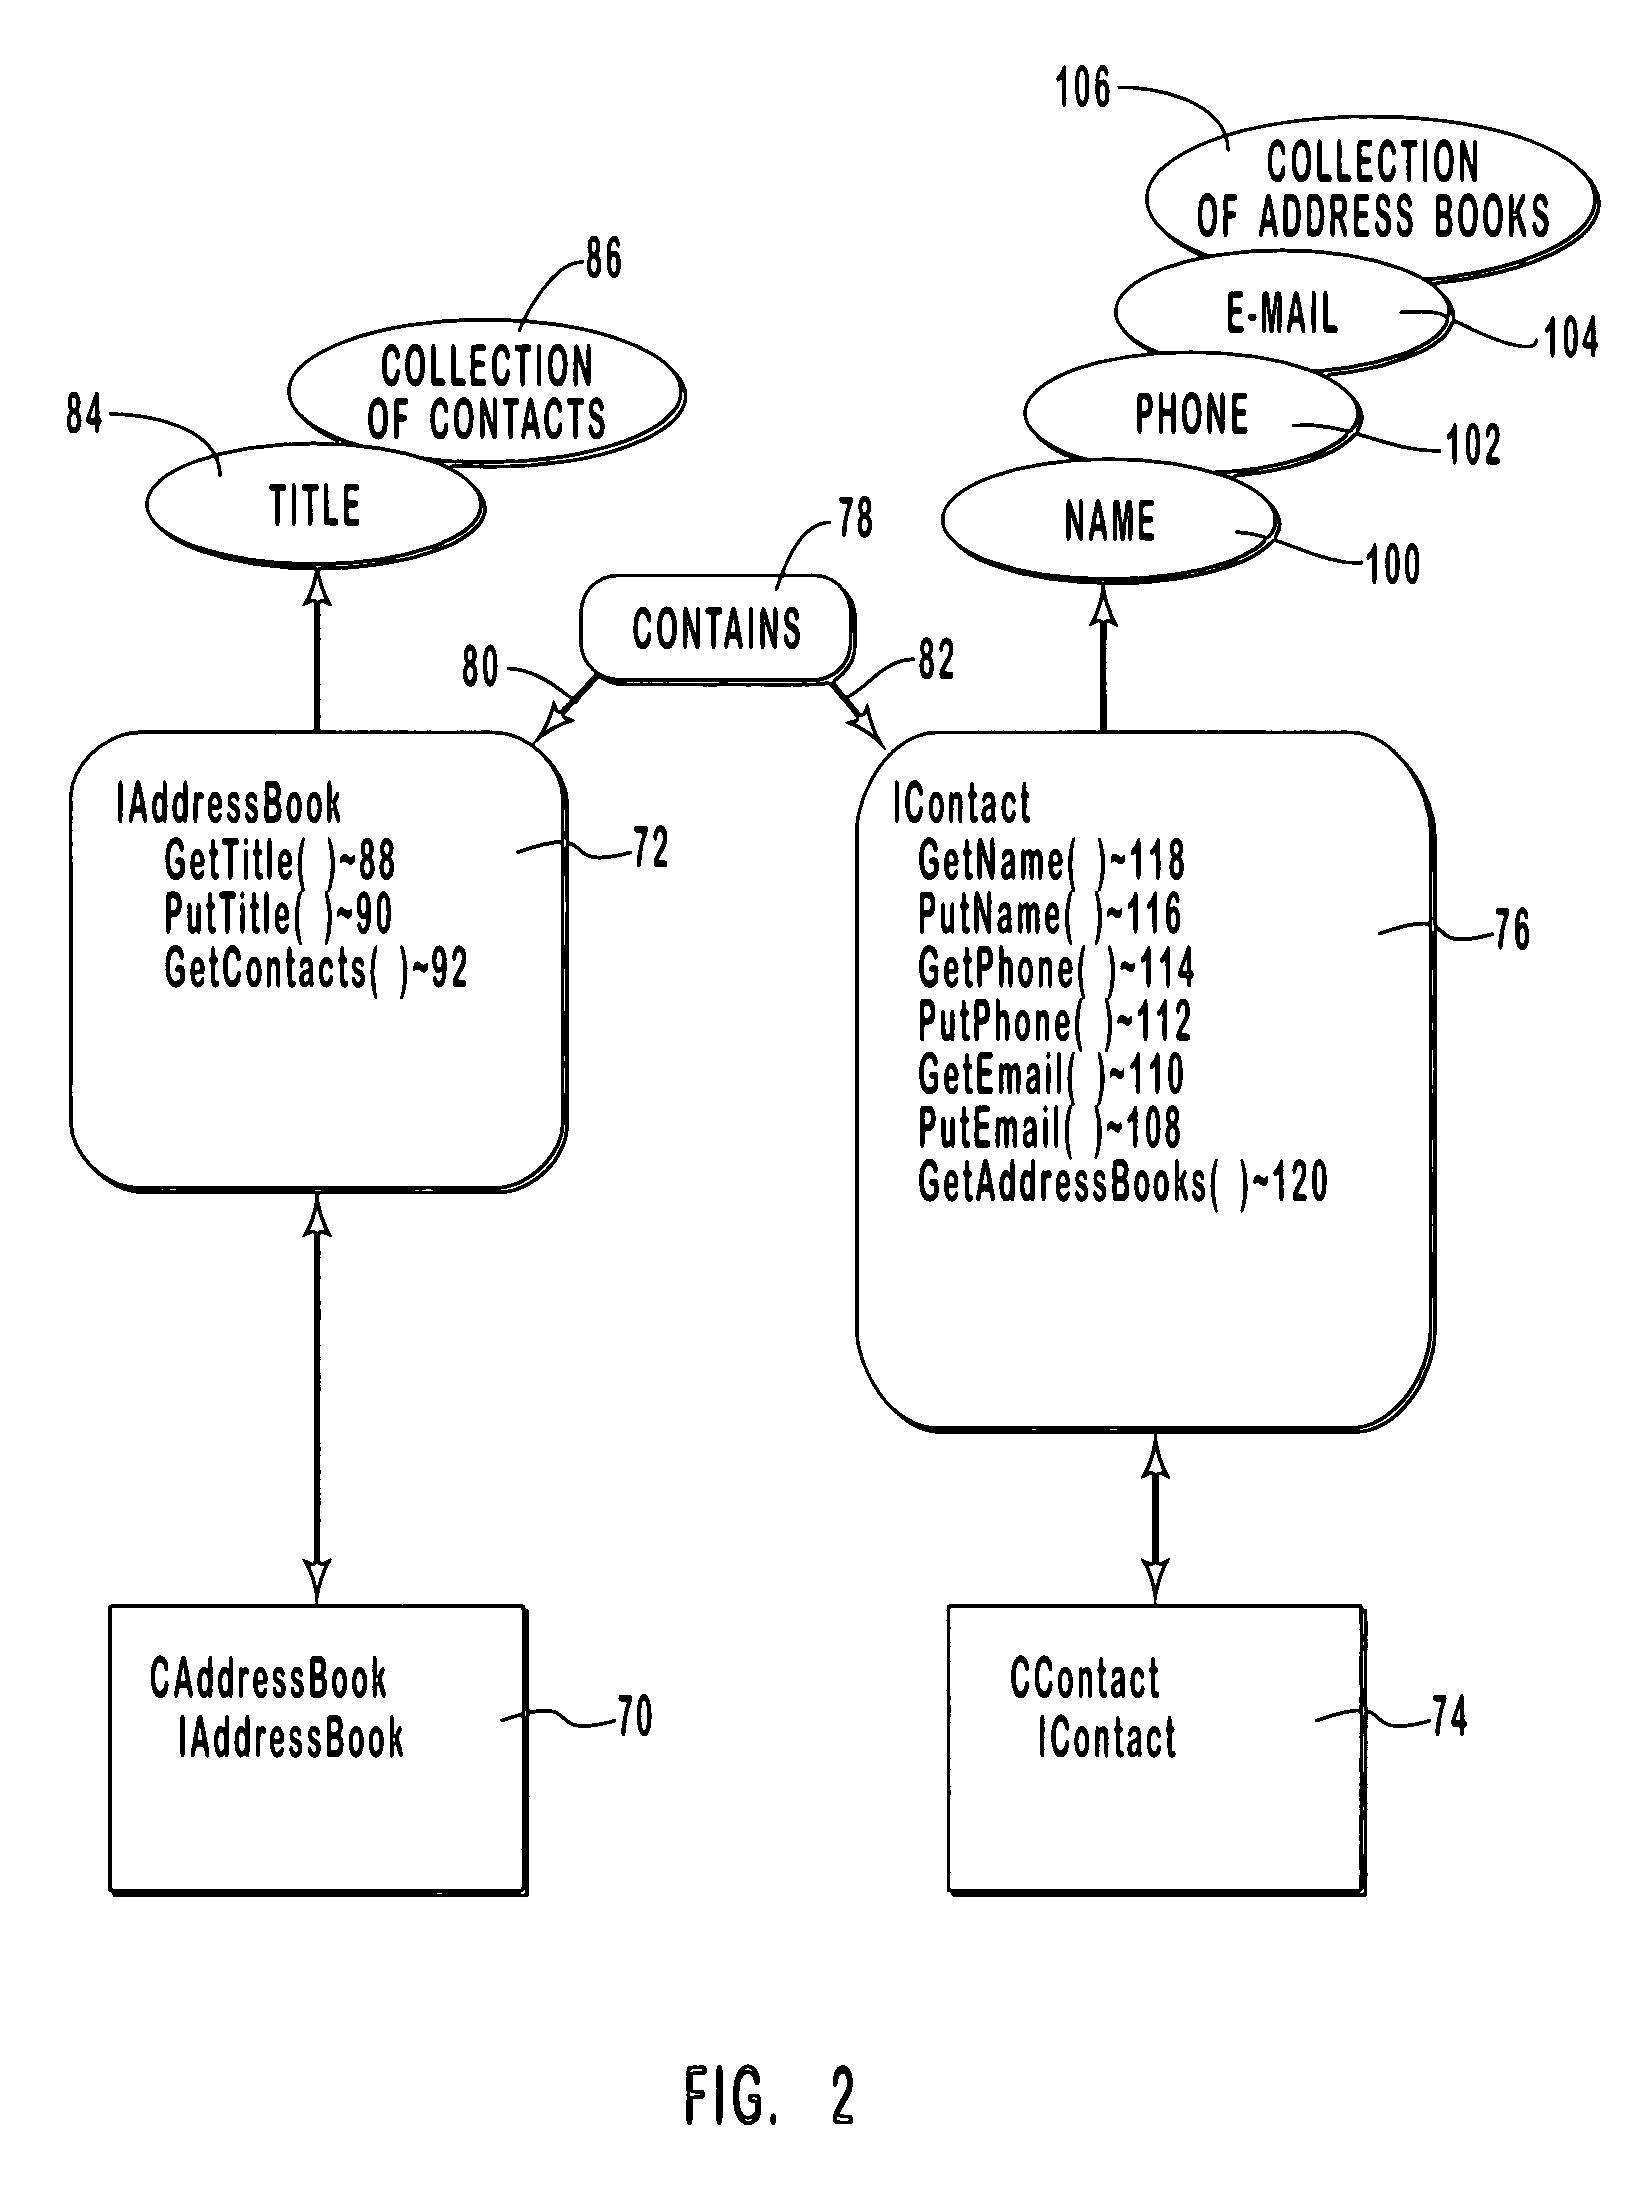 Establishing relationships between objects based on object interfaces